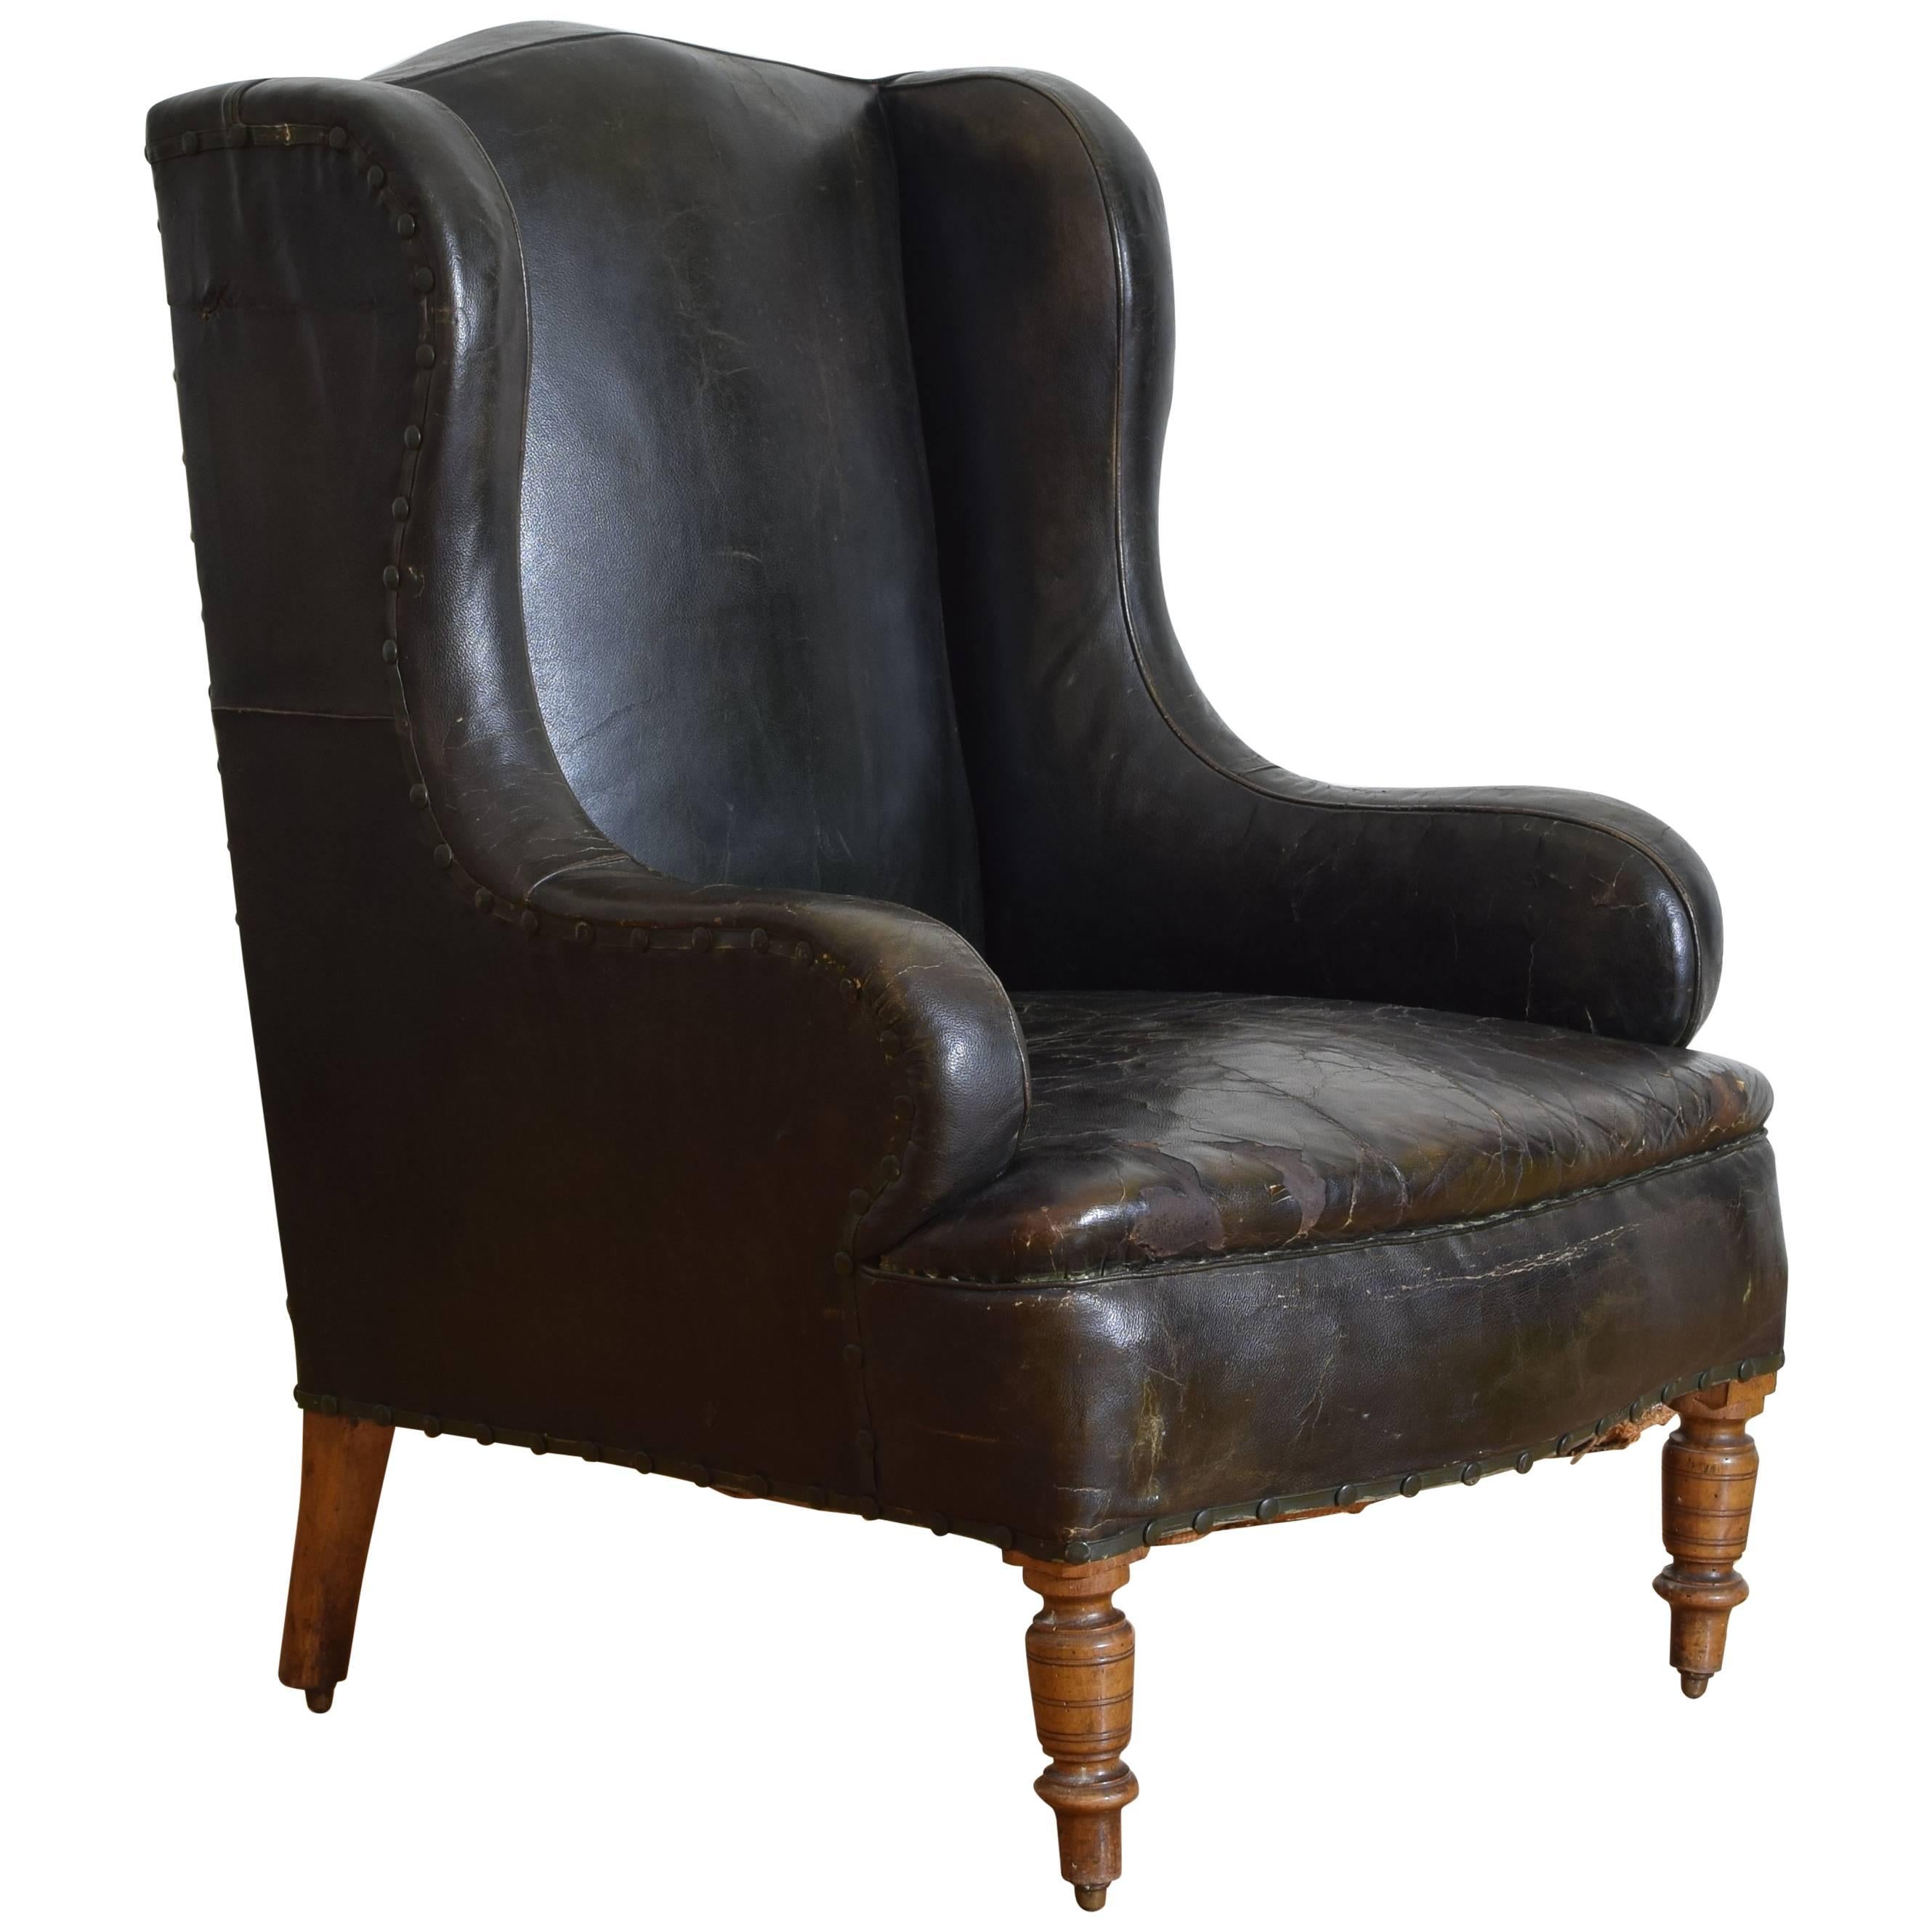 English Louis Philippe Period Leather Upholstered Club Chair, Mid-19th Century